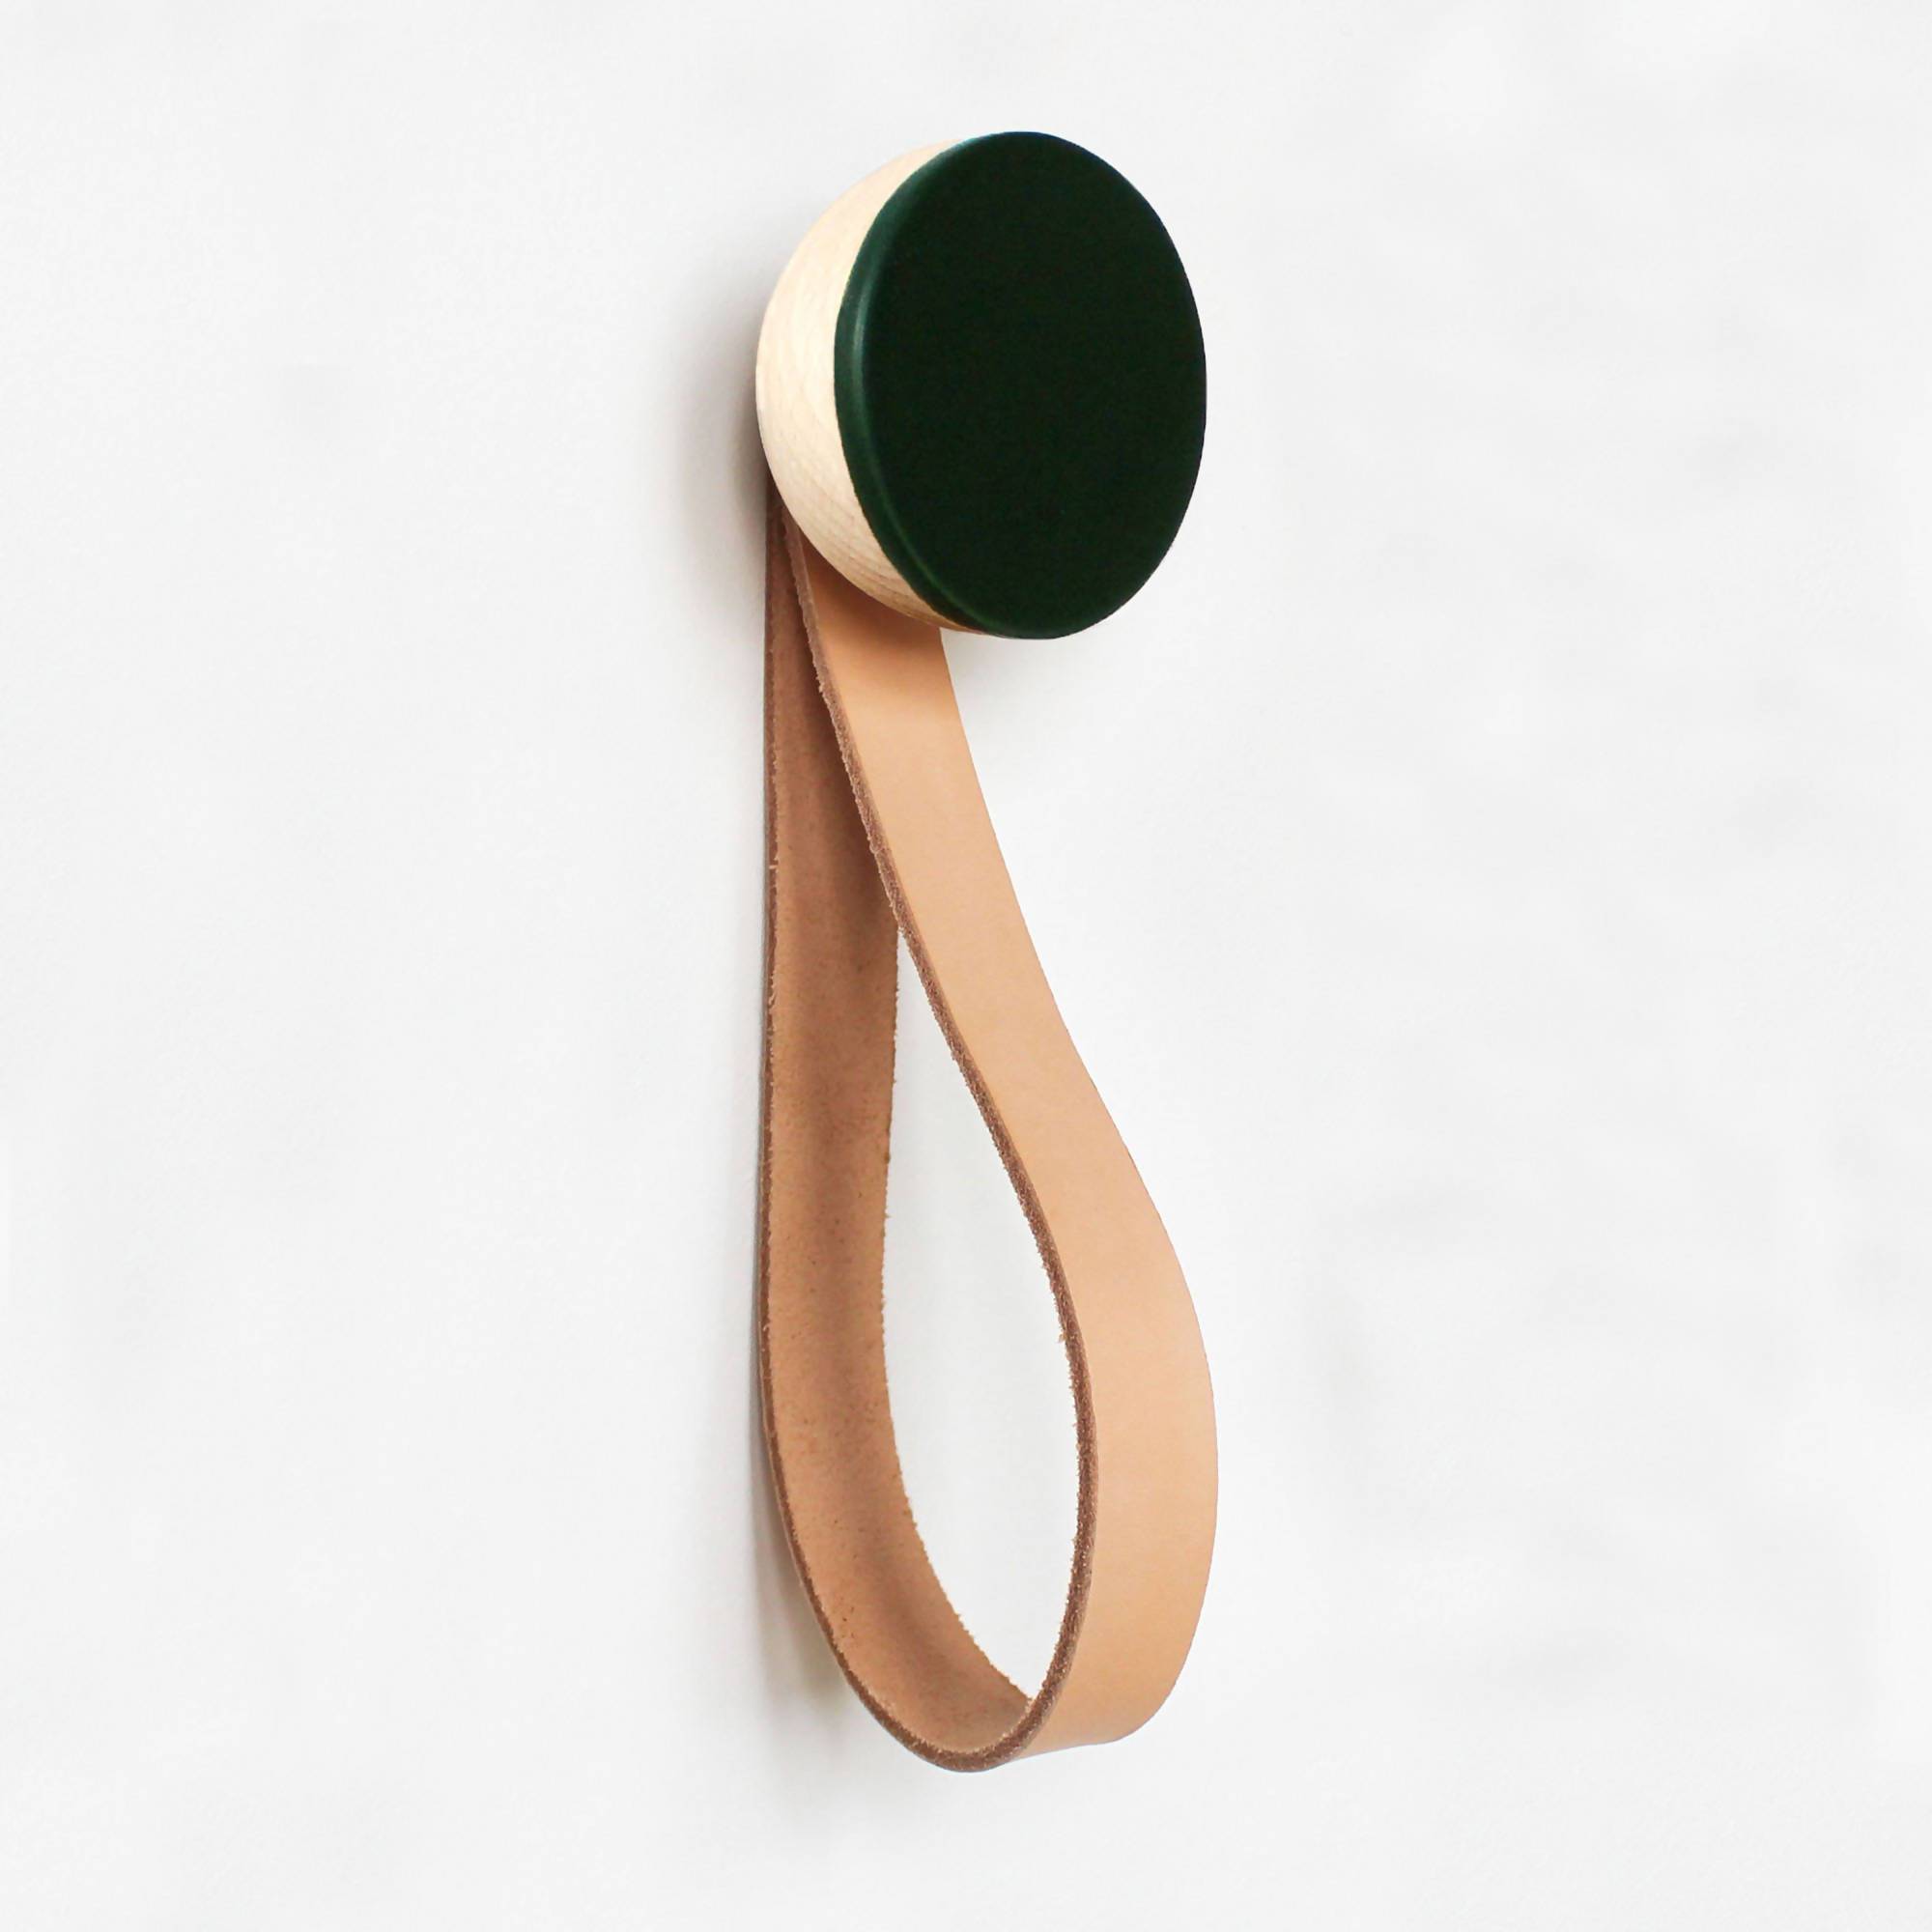 Round Beech Wood & Ceramic Wall Mounted Coat Hook / Hanger with Leather Strap - Dark Green Home Decor 5mm Paper Diameter 6cm 